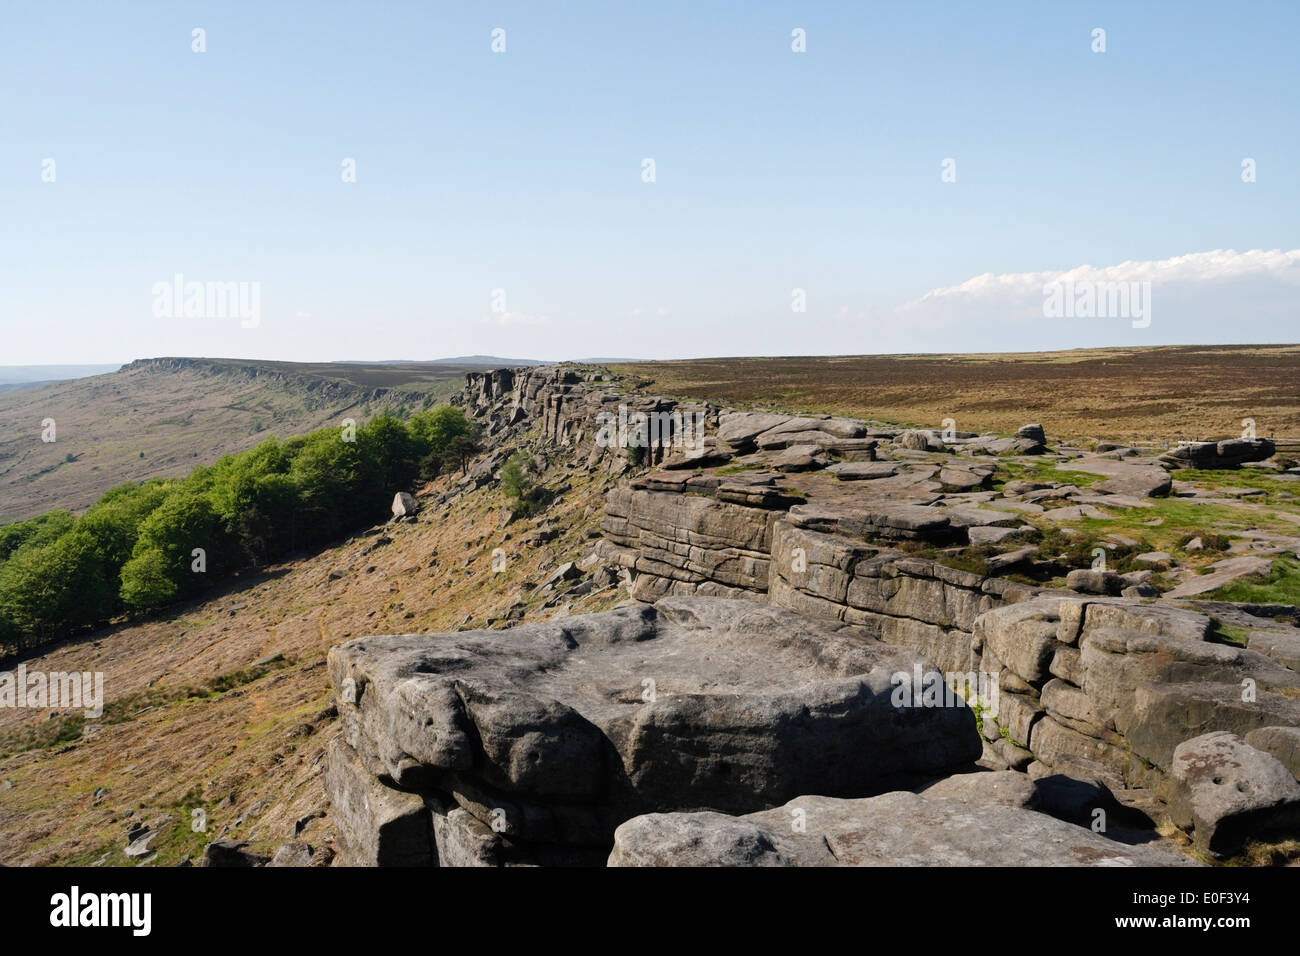 Stanage Edge in the Peak District, National Park Derbyshire England UK, English Moorland landscape. British countryside outdoors scenic view Stock Photo